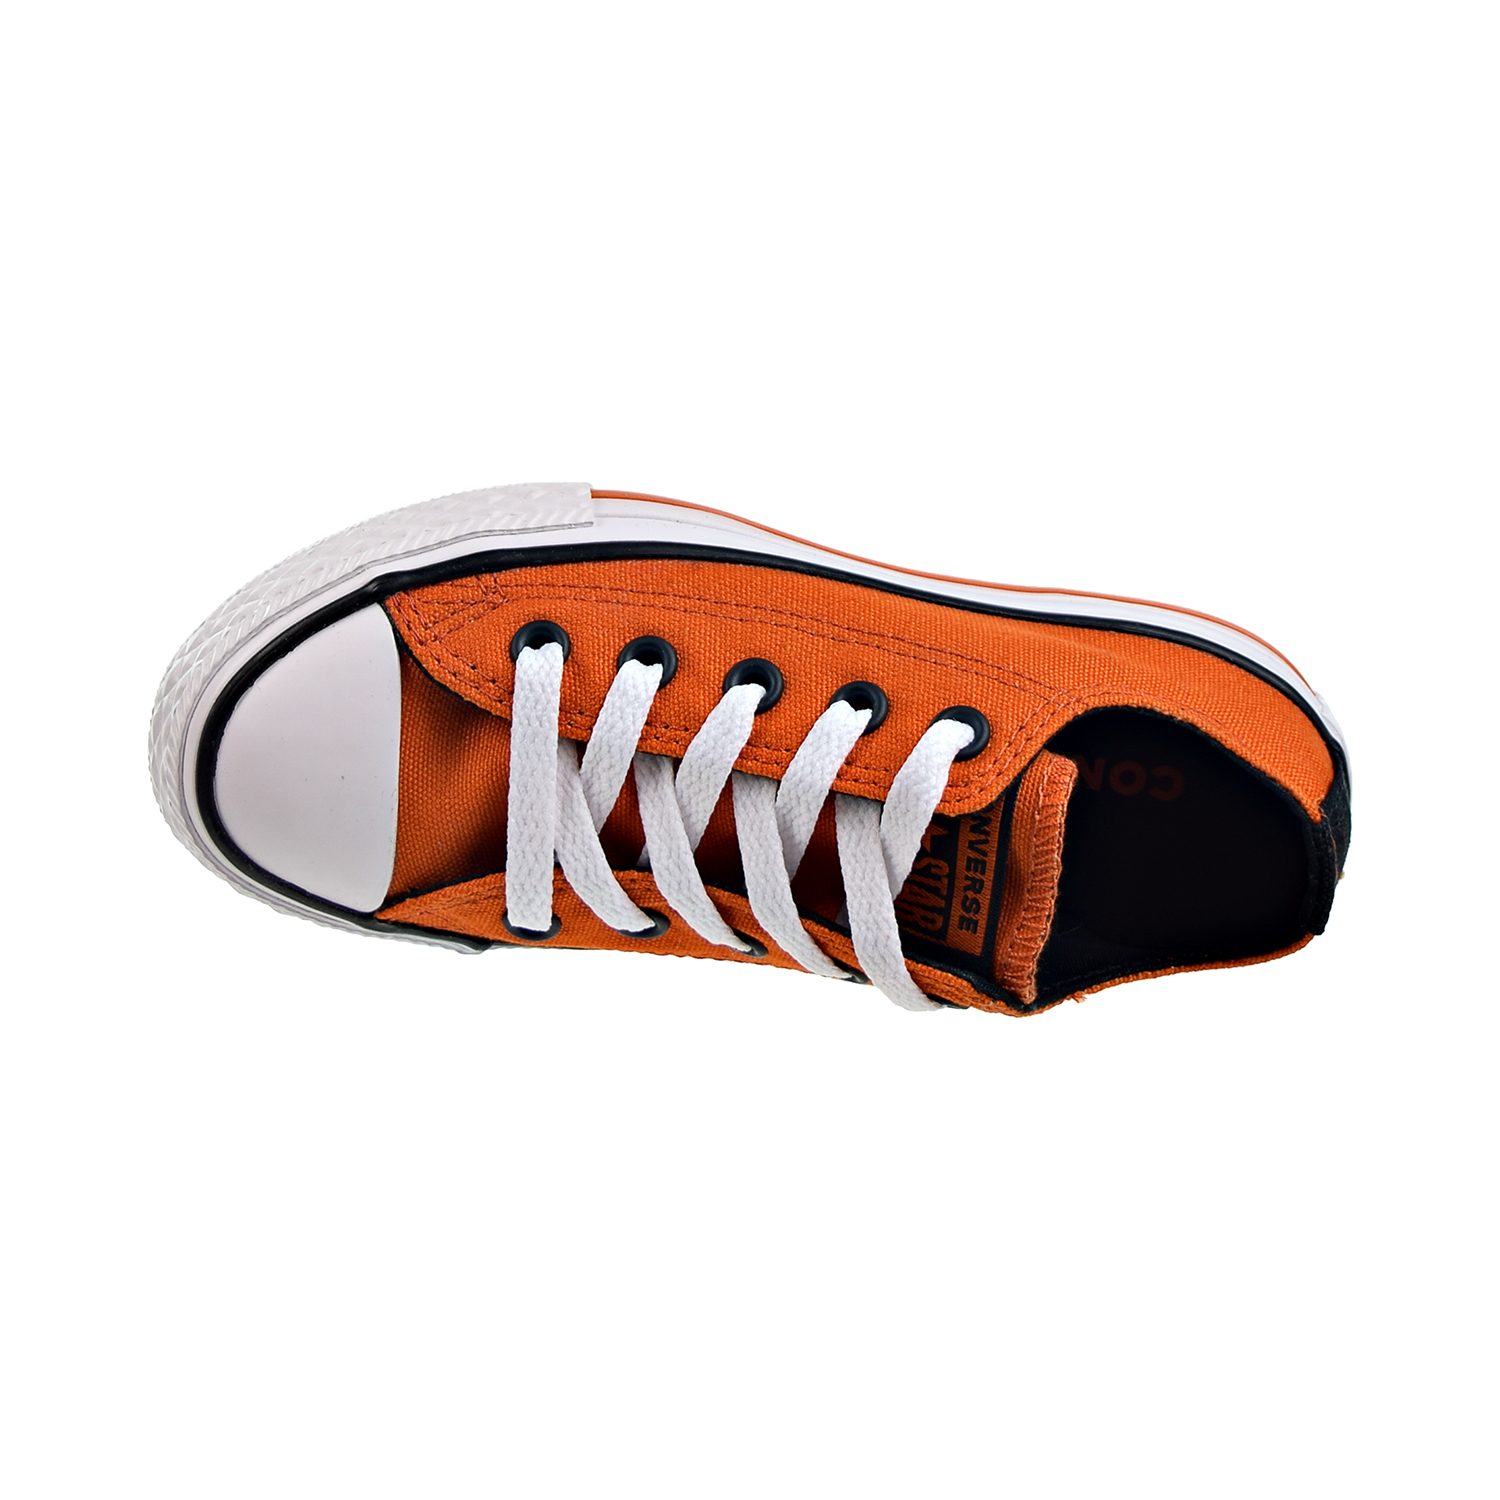 Converse Chuck Taylor All Star Ox Big Kids Shoes Campfire Orange-Black-White 661864f - image 5 of 6